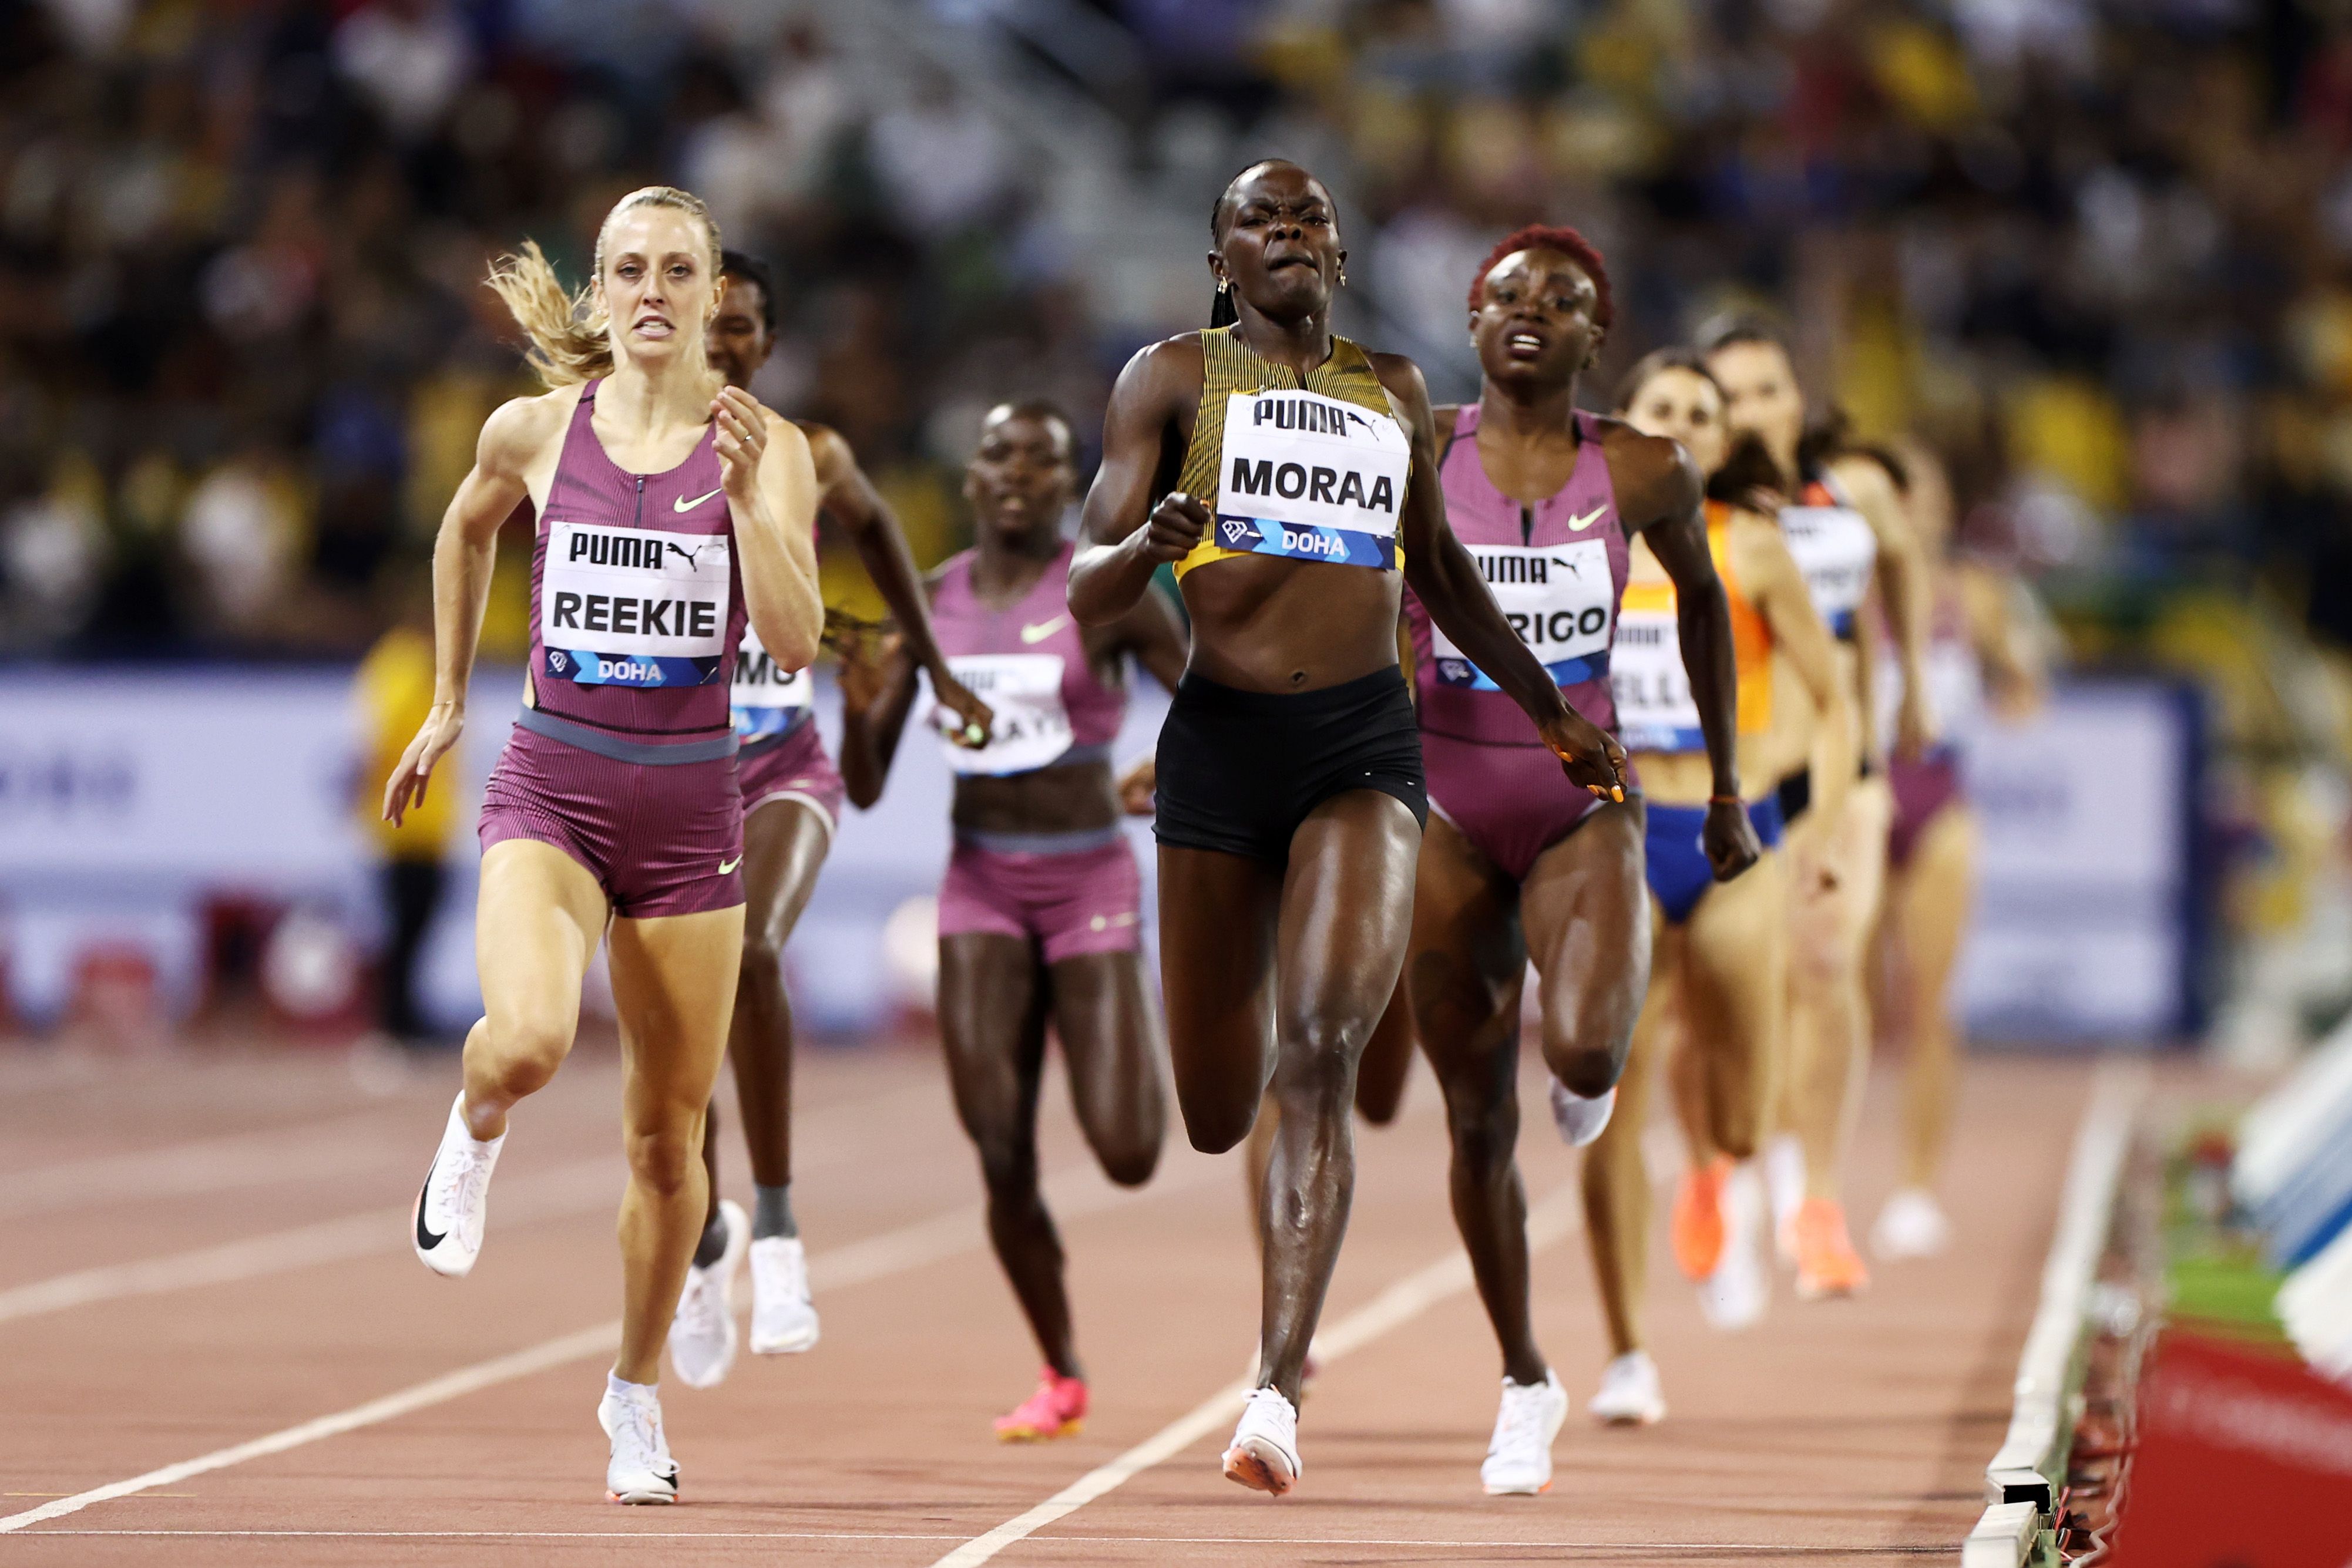 Mary Moraa wins the 800m at the Diamond League meeting in Doha